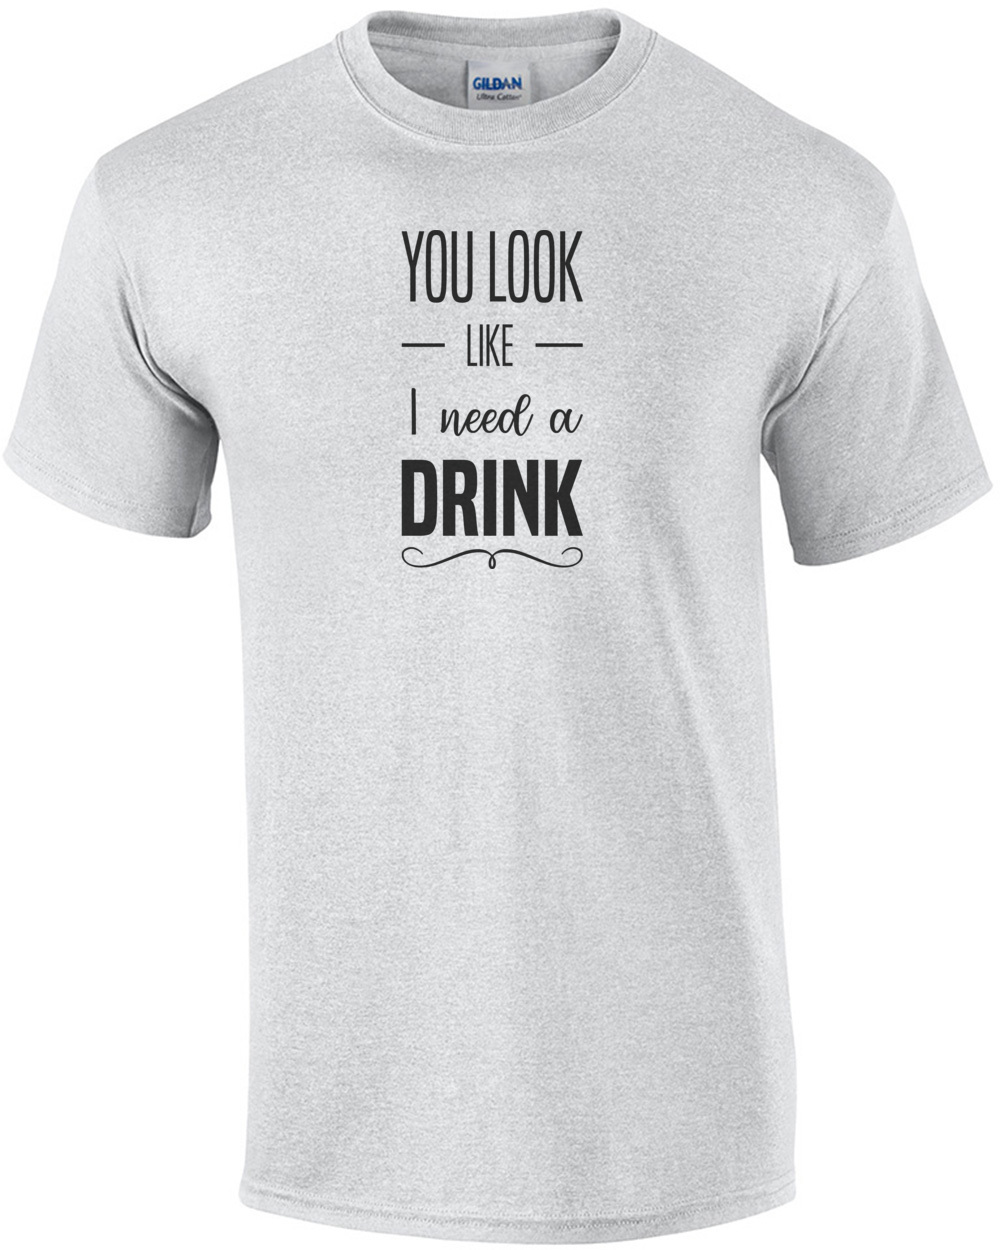 You look like need a drink - funny t-shirt